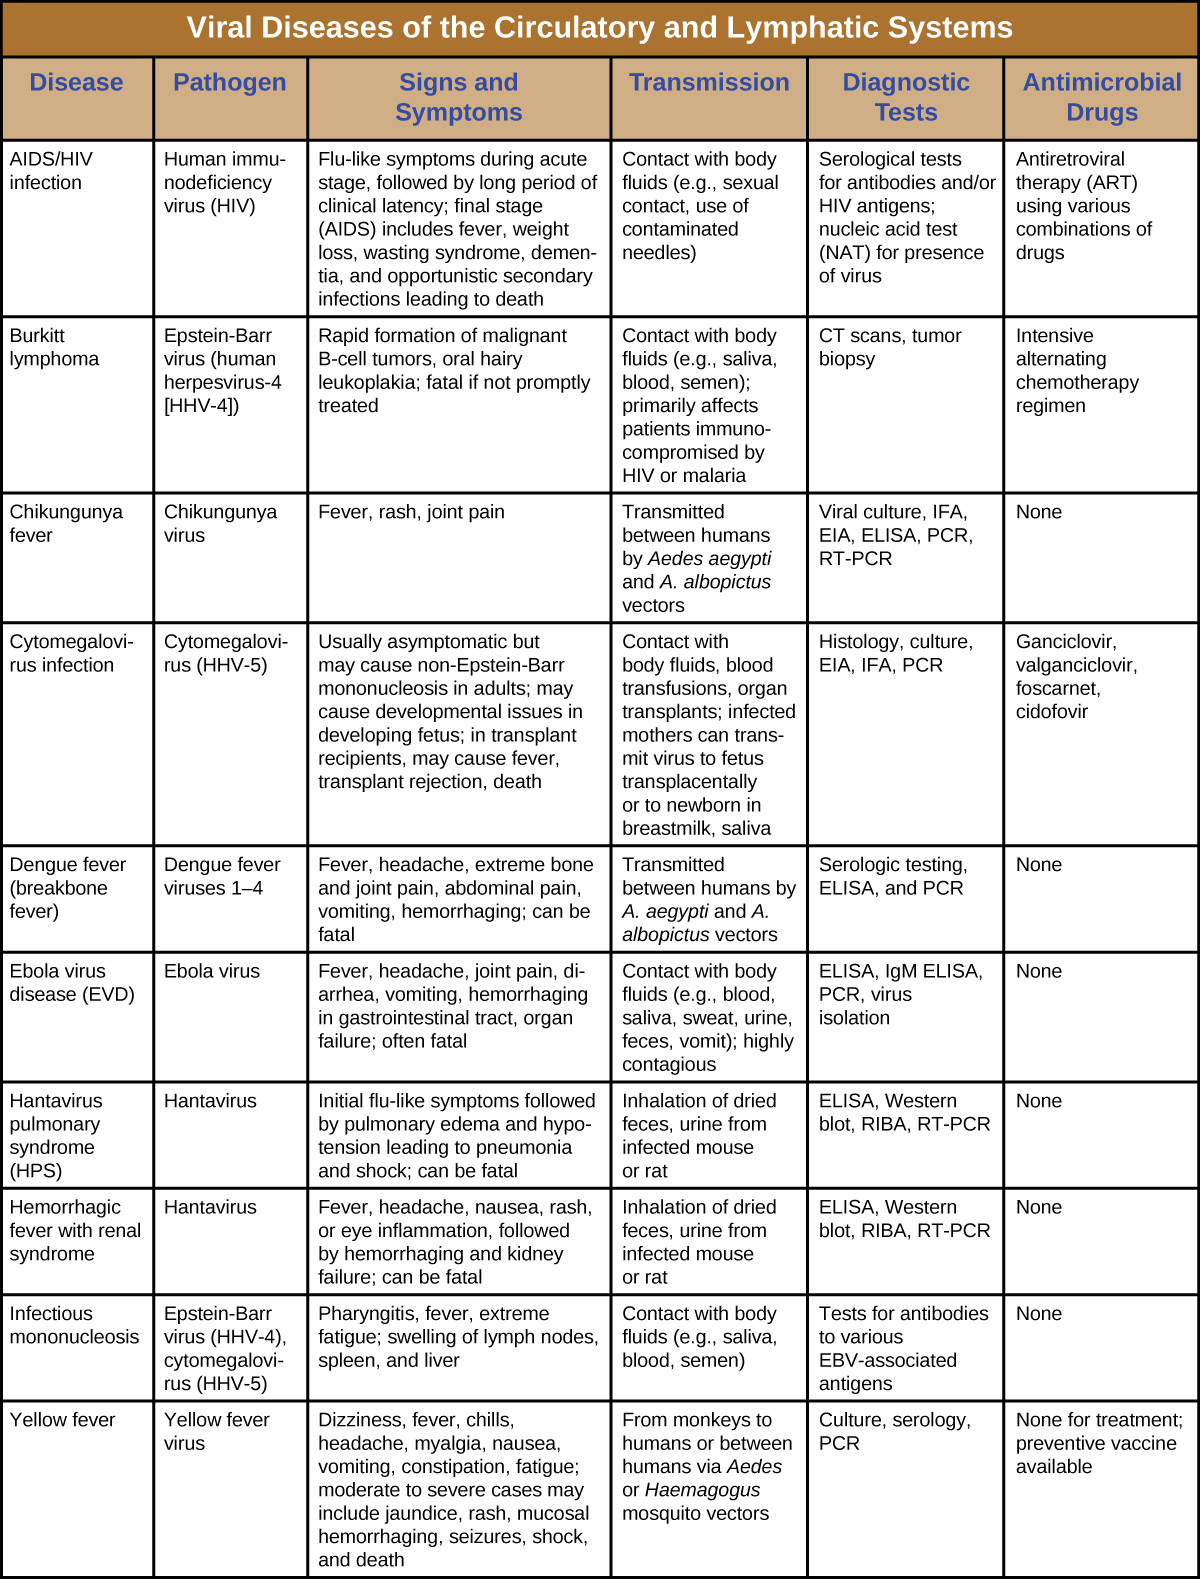 Table titled: Viral Diseases of the Circulatory and Lymphatic Systems. Columns: Disease, Pathogen, Signs and Symptoms, Transmission, Diagnostic Tests, Antimicrobial Drugs. AIDS/HIV infection; Human immunodeficiency virus (HIV); Flu-like symptoms during acute stage, followed by long period of clinical latency; final stage (AIDS) includes fever, weight loss, wasting syndrome, dementia, and opportunistic secondary infections leading to death; Contact with body fluids (e.g., sexual contact, use of contaminated needles); Serological tests for antibodies and/or HIV antigens; nucleic acid test (NAT) for presence of virus; Antiretroviral therapy (ART) using various combinations of drugs. Burkitt lymphoma; Epstein-Barr virus (human herpesvirus-4 [HHV-4]); Rapid formation of malignant B-cell tumors, oral hairy leukoplakia; fatal if not promptly treated; Contact with body fluids (e.g., saliva, blood, semen); primarily affects patients immunocompromised by HIV or malaria; CT scans, tumor biopsy; Intensive alternating chemotherapy regimen. Chikungunya fever; Chikungunya virus; Fever, rash, joint pain ; Transmitted between humans by Aedes aegypti and A. albopictus vectors; Viral culture, IFA, EIA, ELISA, PCR, RT-PCR; None. Cytomegalovirus infection; Cytomegalovirus (HHV-5); Usually asymptomatic but may cause non-Epstein-Barr mononucleosis in adults; may cause developmental issues in developing fetus; in transplant recipients, may cause fever, transplant rejection, death; Contact with body fluids, blood transfusions, organ transplants; infected mothers can transmit virus to fetus transplacentally or to newborn in breastmilk, saliva; Histology, culture, EIA, IFA, PCR; Ganciclovir, valganciclovir, foscarnet, cidofovir. Dengue fever (breakbone fever); Dengue fever viruses 1–4; Fever, headache, extreme bone and joint pain, abdominal pain, vomiting, hemorrhaging; can be fatal Transmitted between humans by A. aegypti and A. albopictus vectors; Serologic testing, ELISA, and RT-PCR; None. Ebola virus disease (EVD); Ebola virus; Fever, headache, joint pain, diarrhea, vomiting, hemorrhaging in gastrointestinal tract, organ failure; often fatal; Contact with body fluids (e.g., blood, saliva, sweat, urine, feces, vomit); highly contagious; ELISA, IgM ELISA, PCR, and virus isolation; None. Hantavirus pulmonary syndrome (HPS); Hantavirus; Initial flu-like symptoms followed by pulmonary edema and hypotension leading to pneumonia and shock; can be fatal; Inhalation of dried feces, urine from infected mouse or rat; ELISA, Western blot, RIBA, RT-PCR; None. Hemorrhagic fever with renal syndrome; Hantavirus; Fever, headache, nausea, rash, or eye inflammation, followed by hemorrhaging and kidney failure; can be fatal Inhalation of dried feces, urine from infected mouse or rat; ELISA, Western blot, RIBA, RT-PCR; None. Infectious mononucleosis; Epstein-Barr virus (HHV-4), cytomegalovirus (HHV-5); Pharyngitis, fever, extreme fatigue; swelling of lymph nodes, spleen, and liver; Contact with body fluids (e.g., saliva, blood, semen); Tests for antibodies to various EBV-associated antigens; None. Yellow fever; Yellow fever virus; Dizziness, fever, chills, headache, myalgia, nausea, vomiting, constipation, fatigue; moderate to severe cases may include jaundice, rash, mucosal, hemorrhaging, seizures, shock, and death; From monkeys to humans or between humans via Aedes or Haemagogus mosquito vectors; Culture, serology, PCR; None for treatment; preventive vaccine available.